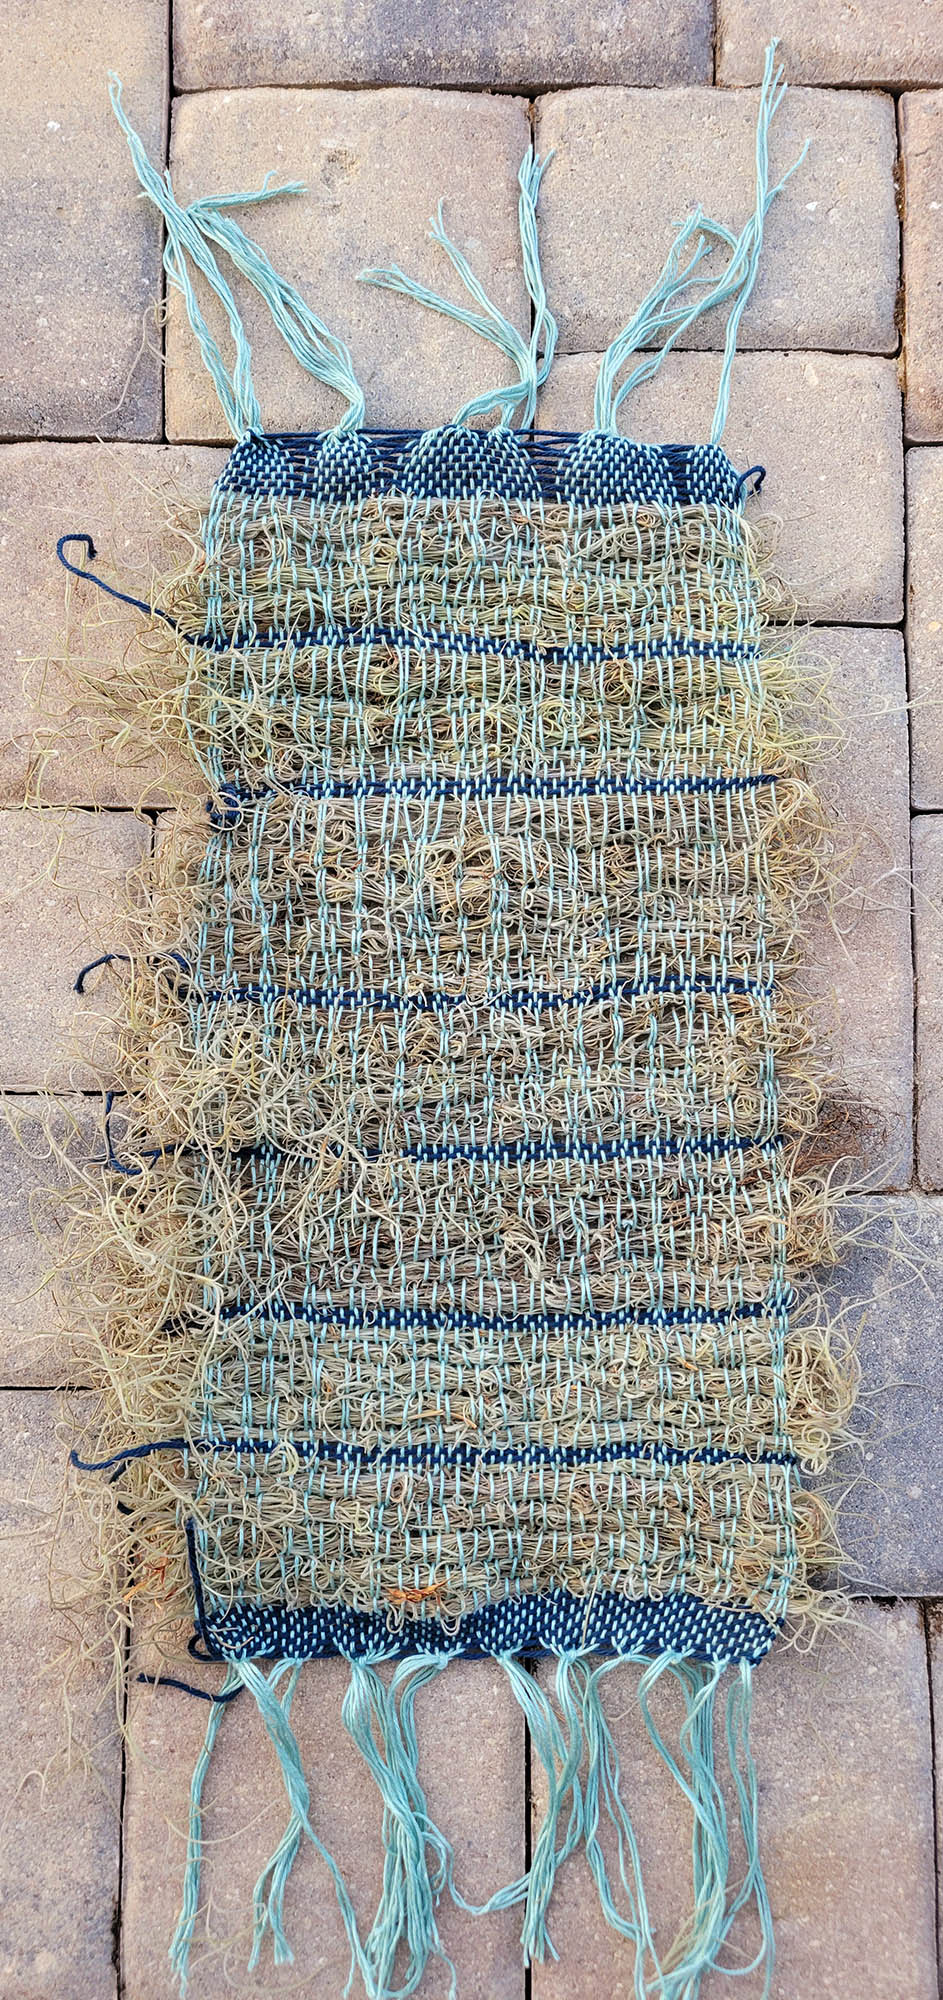 Weaving with weft mostly of Spanish moss